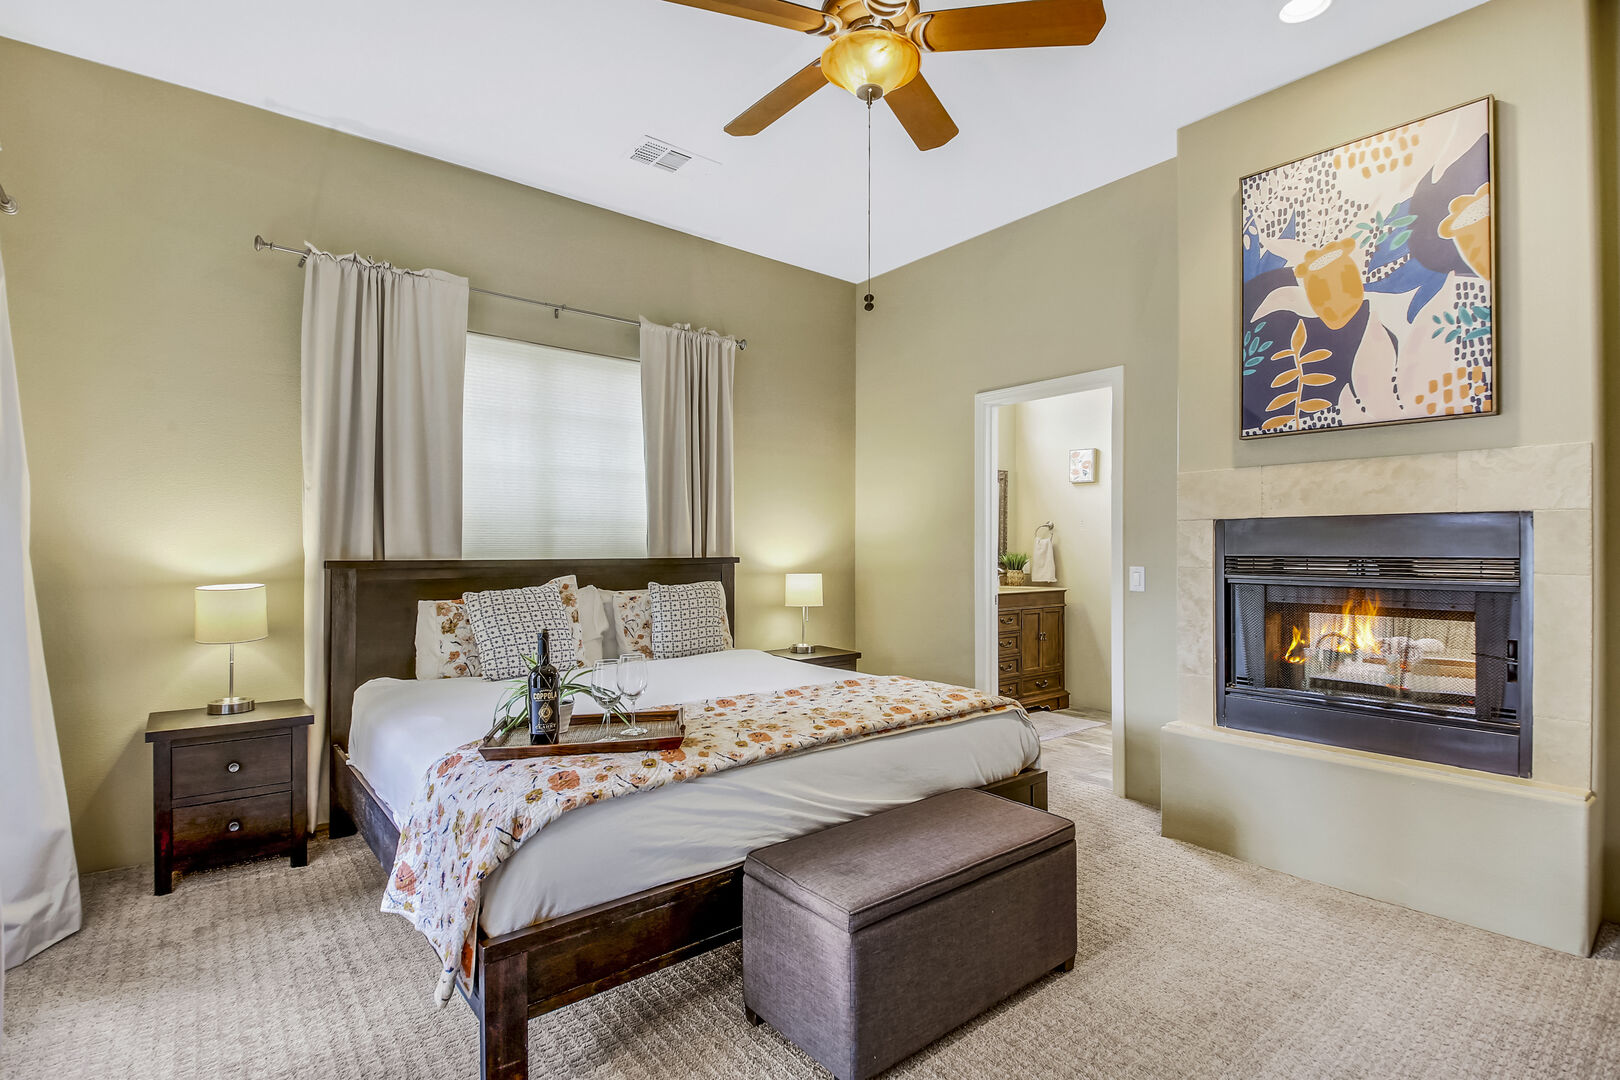 Master Suite 1 is located next to the entrance and features a King-sized Bed.